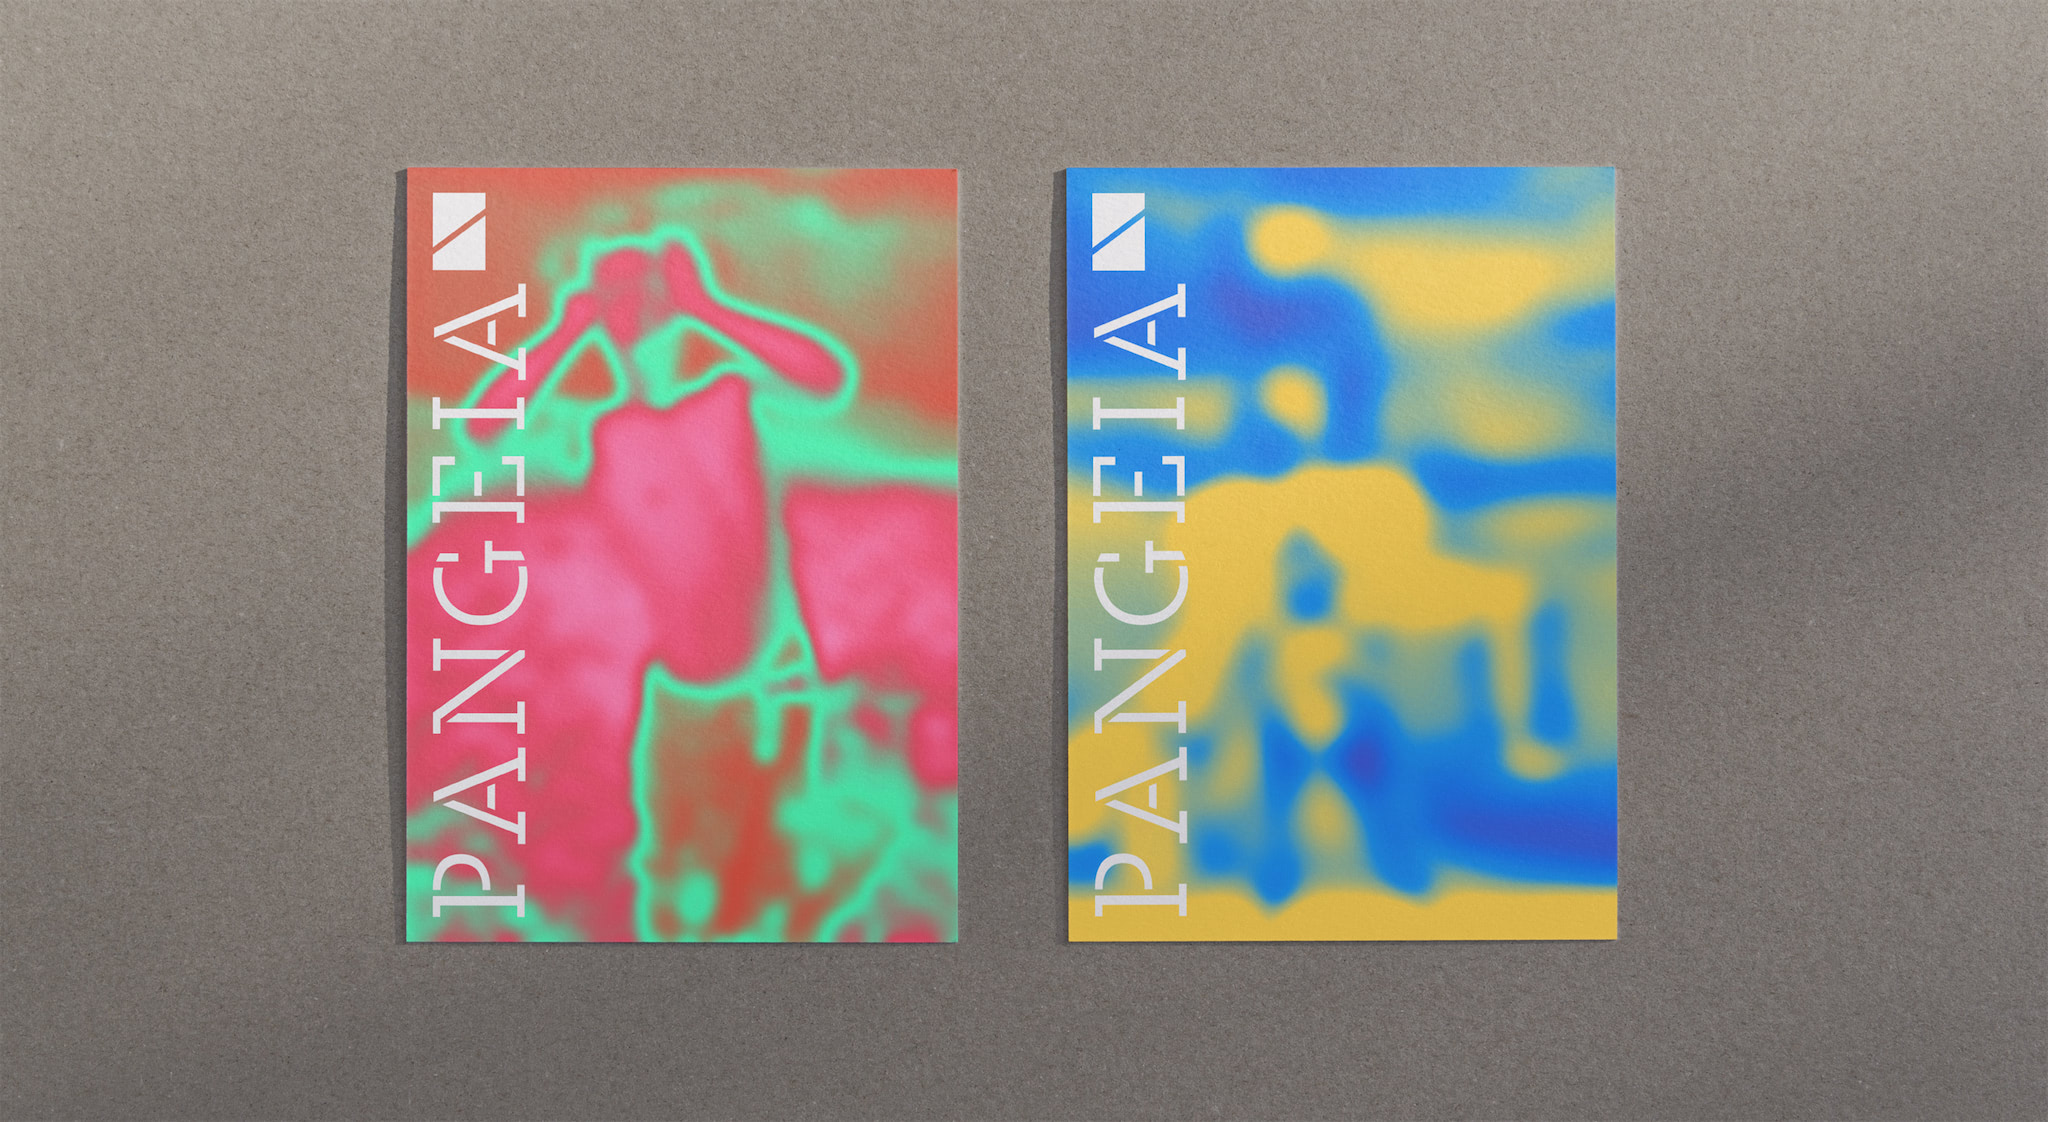 Two pamphlets with colorful background and PANGEIA logotype vertically.